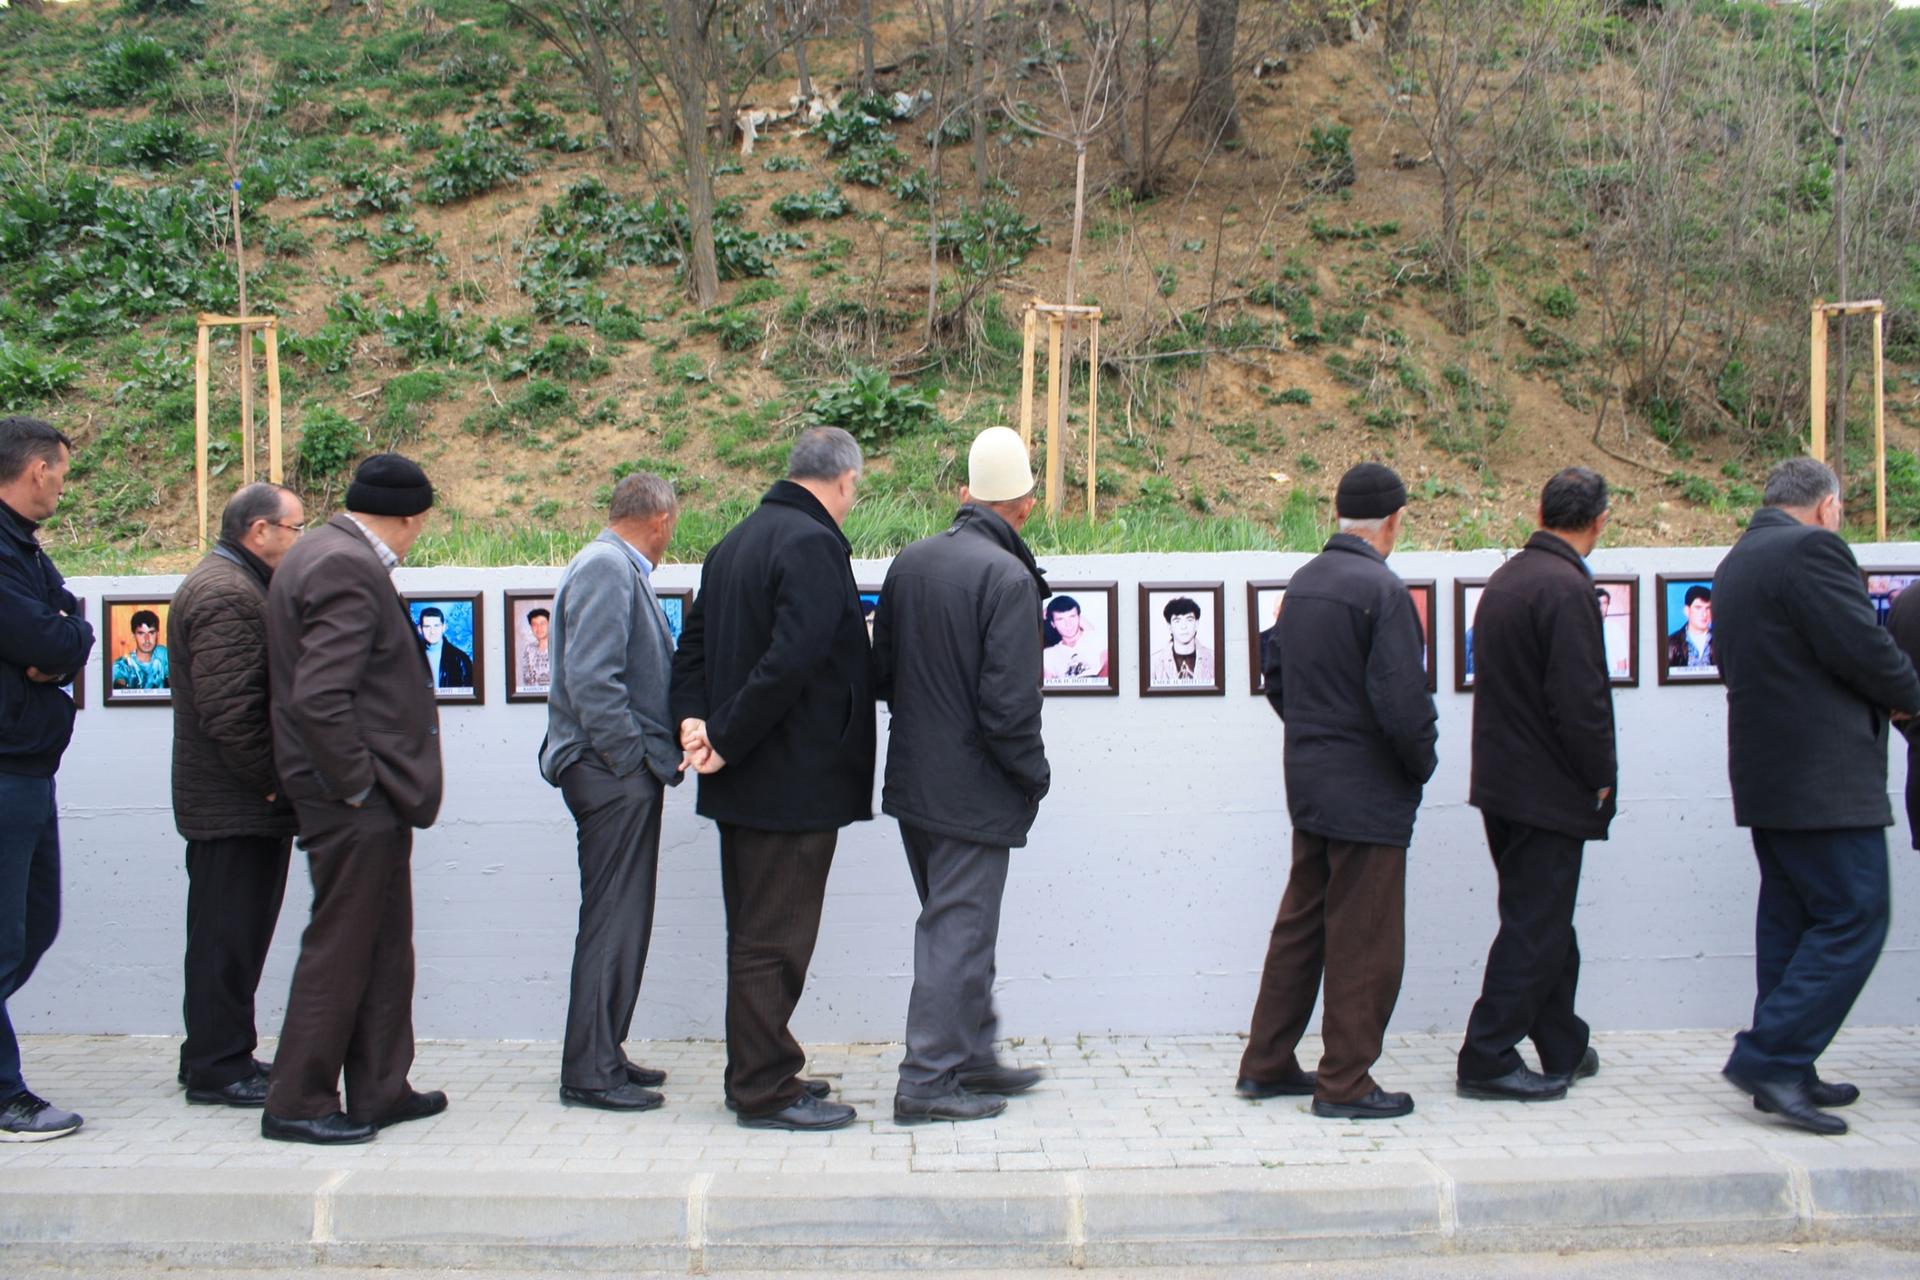 A line of men are shown standing next to a wall with photographs posted on it.